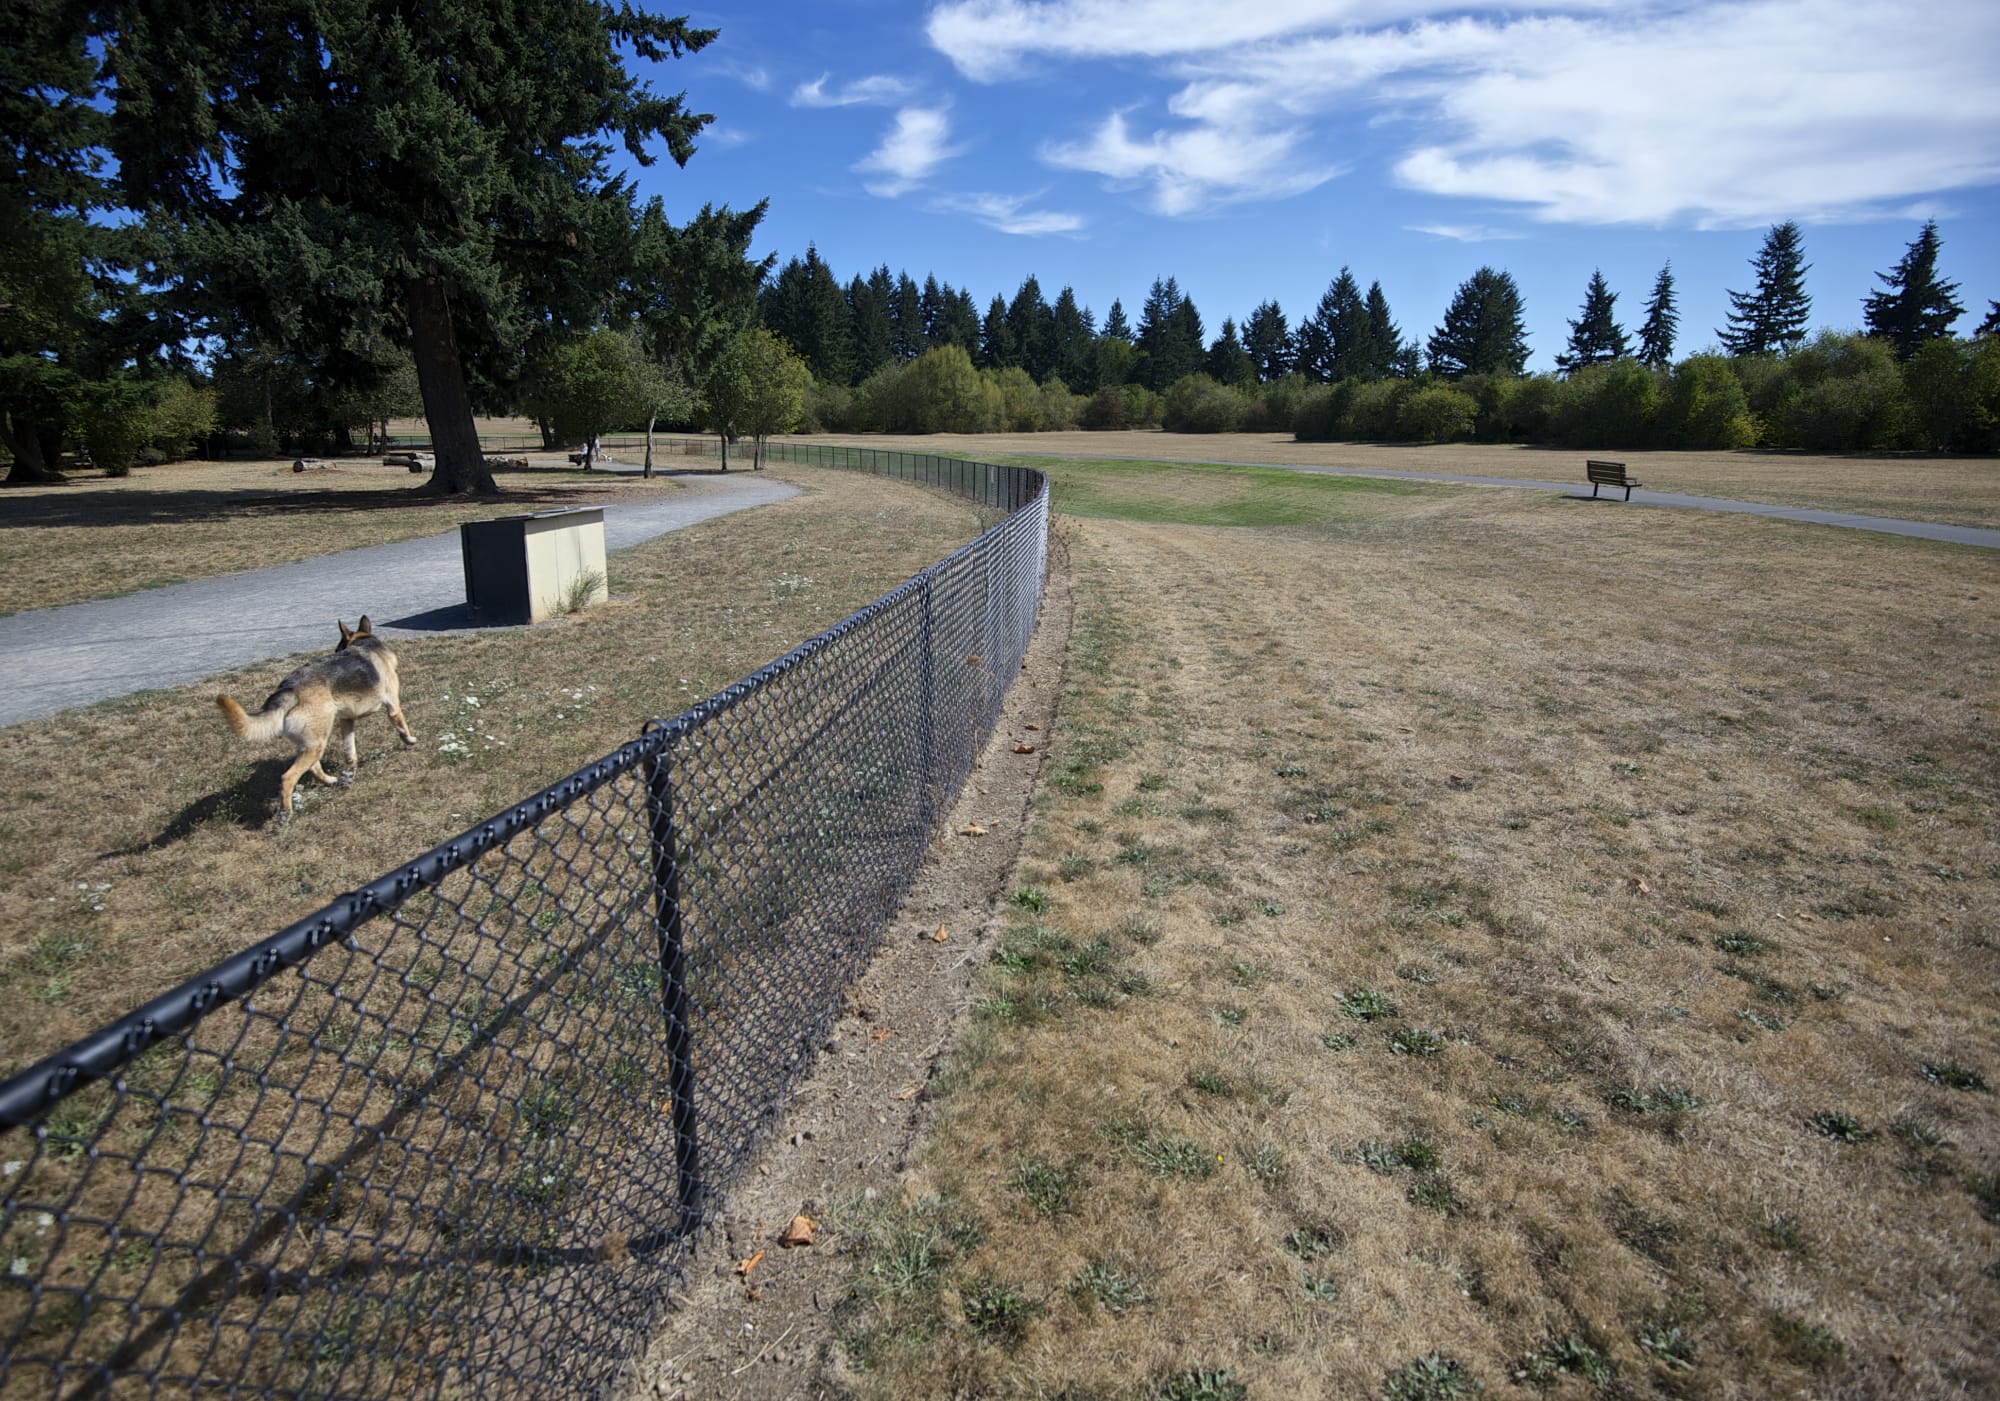 The county has signed a right-of-use agreement with Miracle League and the Vancouver Metro Senior Softball Association to allow the nonprofits to build two special ball fields near the dog park at Pacific Park.